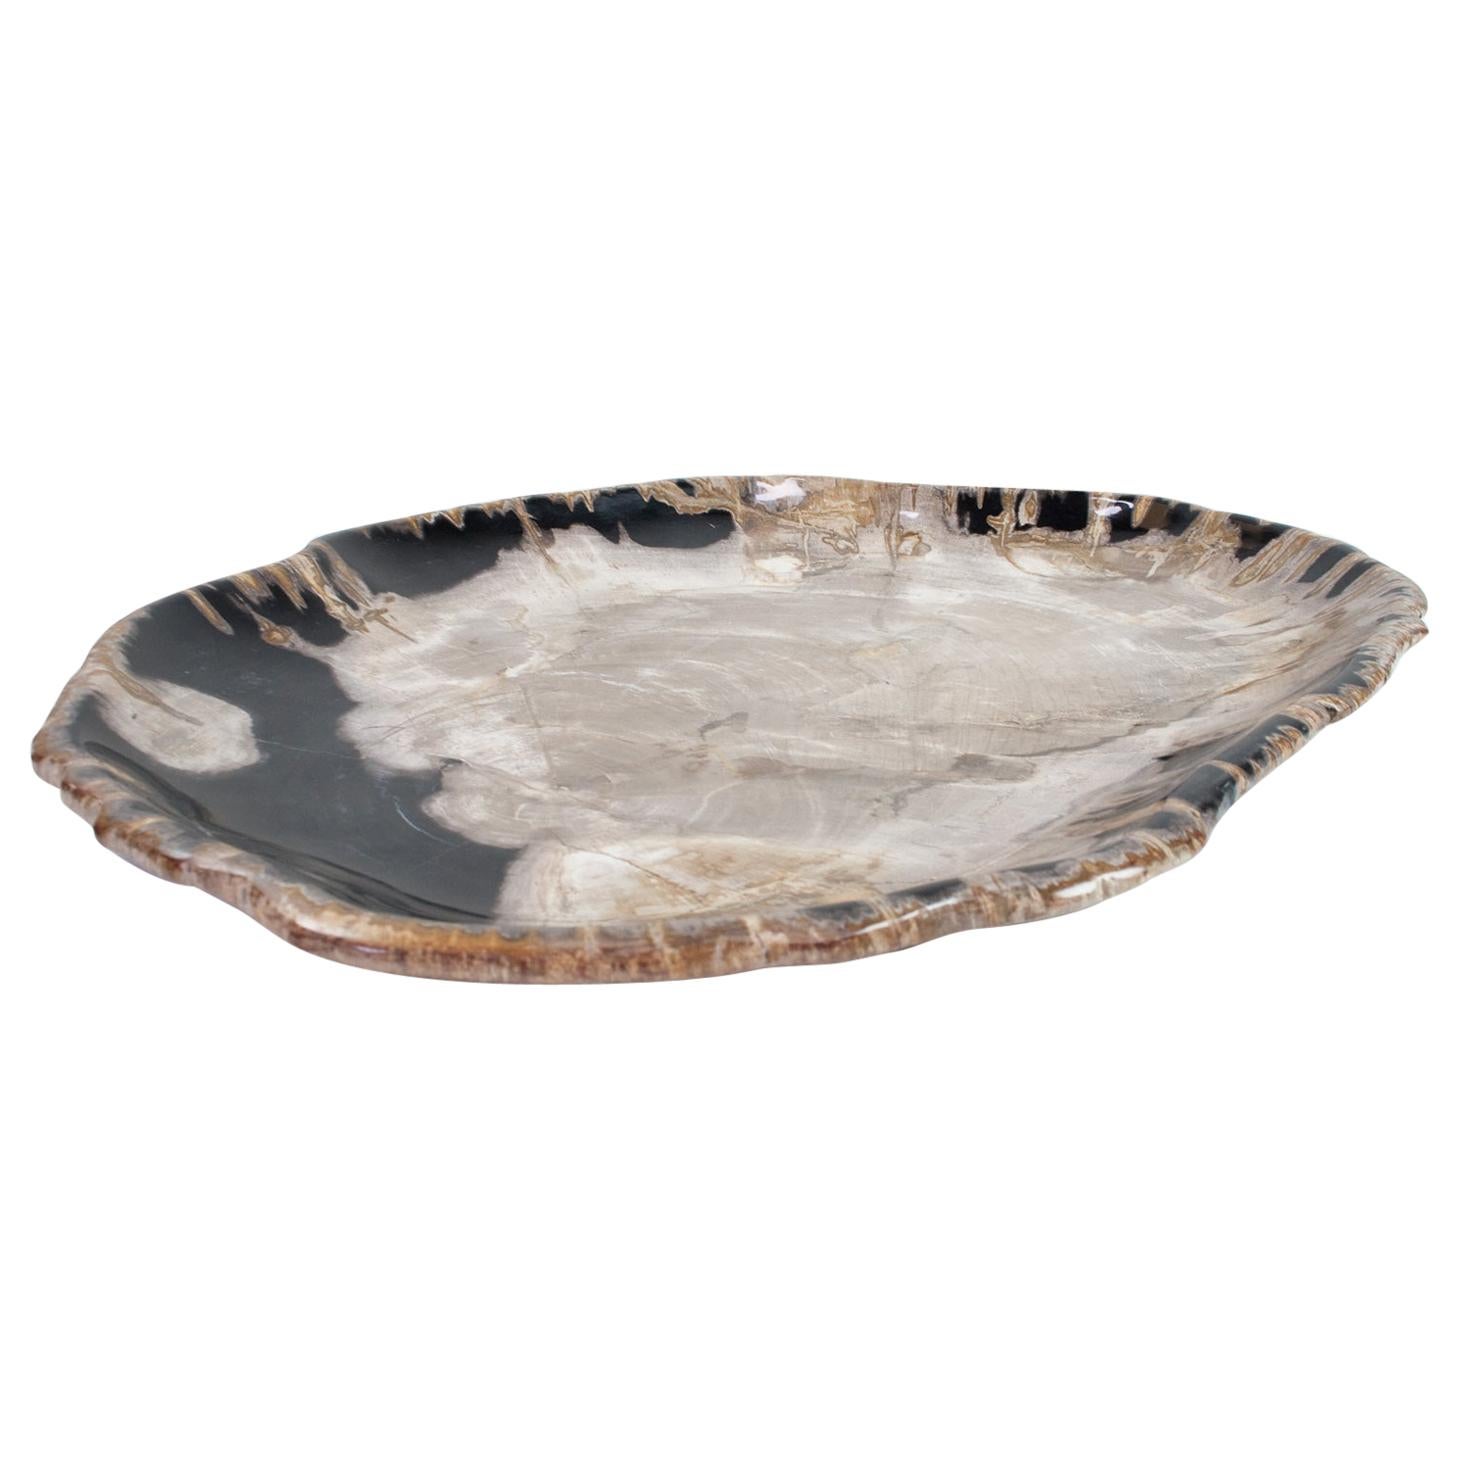 Very Large Petrified Wood Plate or Flat Tray, Home Accessory of Organic Origin